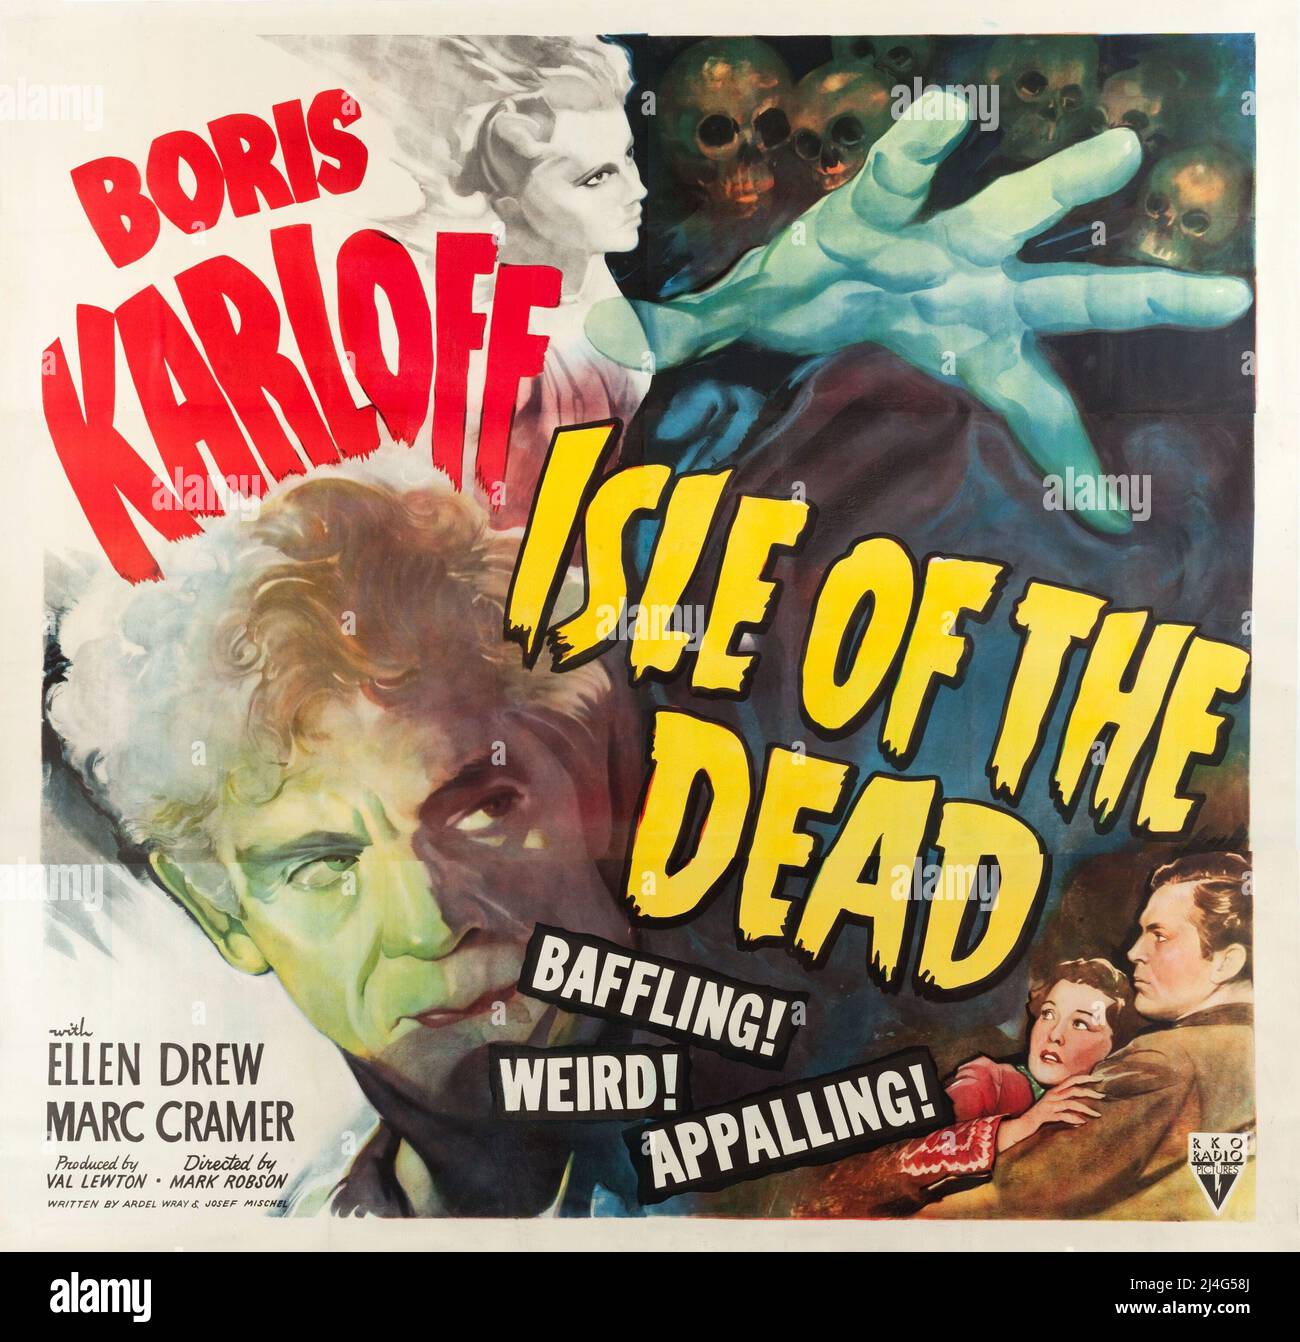 BORIS KARLOFF in ISLE OF THE DEAD (1945), directed by MARK ROBSON. Credit: RKO RADIO PICTURES / Album Stock Photo